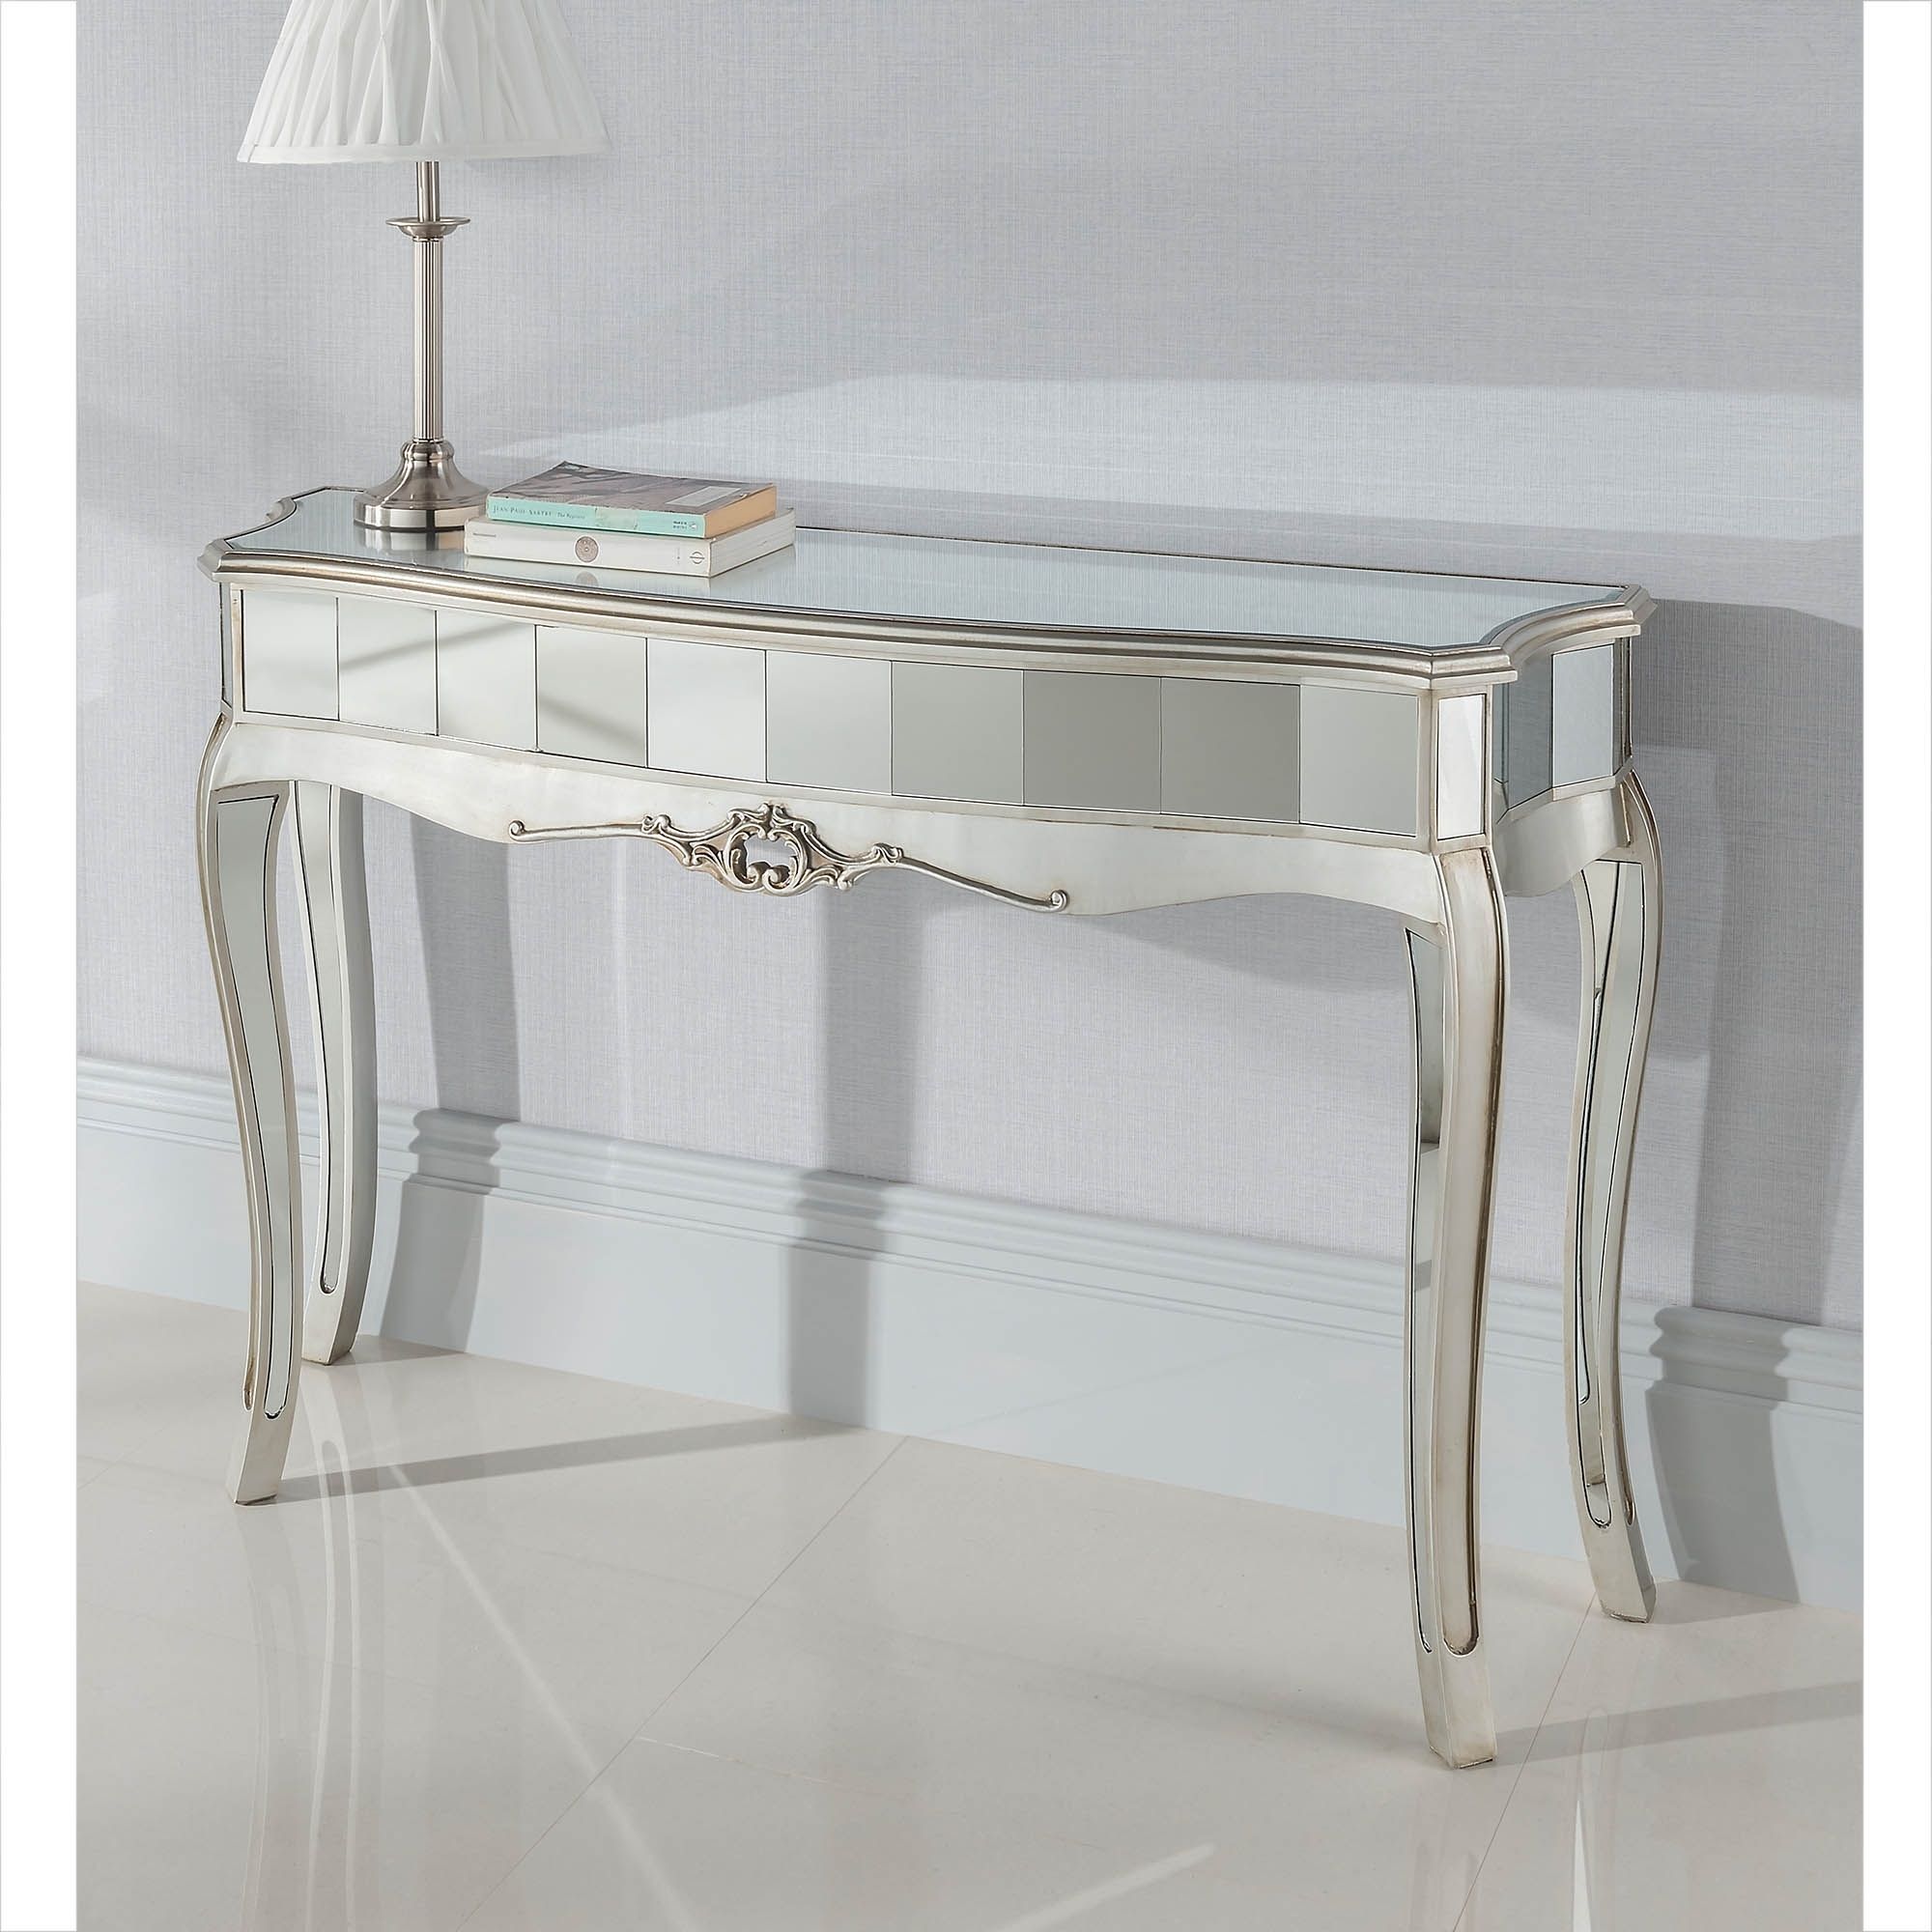 Argente Mirrored Console Table | Venetian Glass Furniture Throughout Mirrored Modern Console Tables (View 10 of 20)